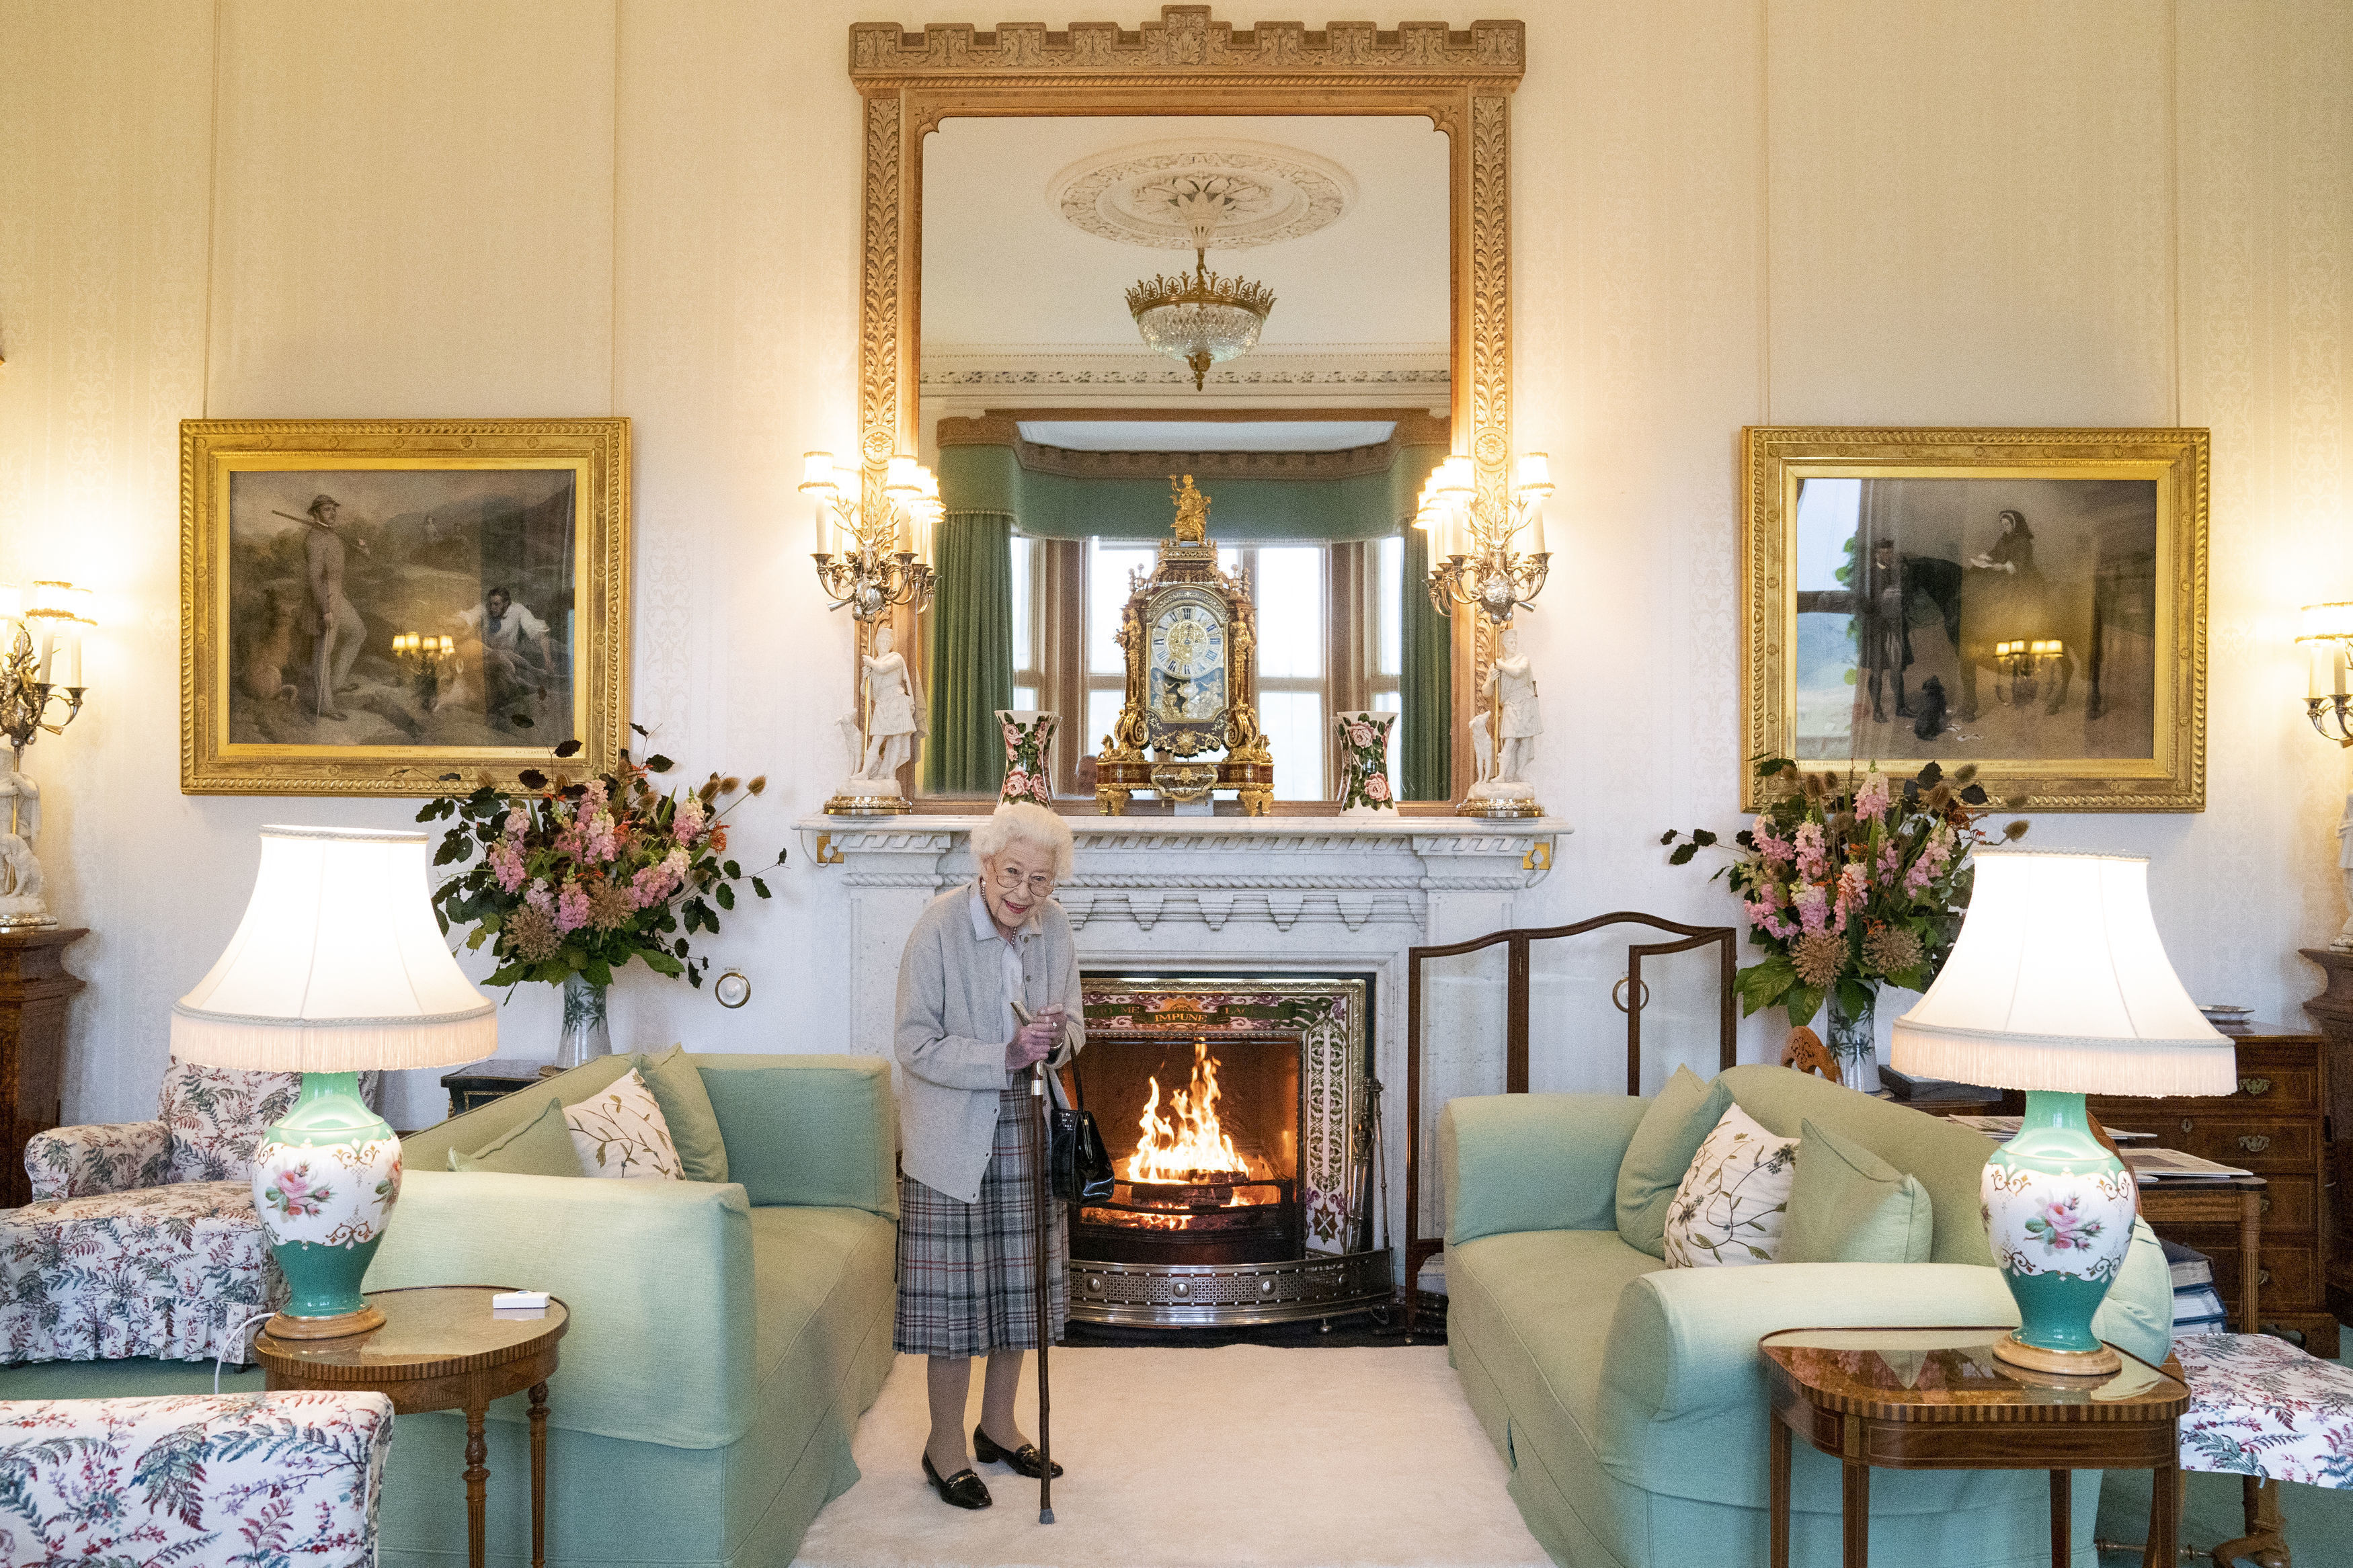 Britain's Queen Elizabeth II waits in the Drawing Room before receiving Liz Truss for an audience at Balmoral, where Truss was be invited to become Prime Minister and form a new government, in Aberdeenshire, Scotland, Sept. 6, 2022. (Jane Barlow/Pool Photo via AP)